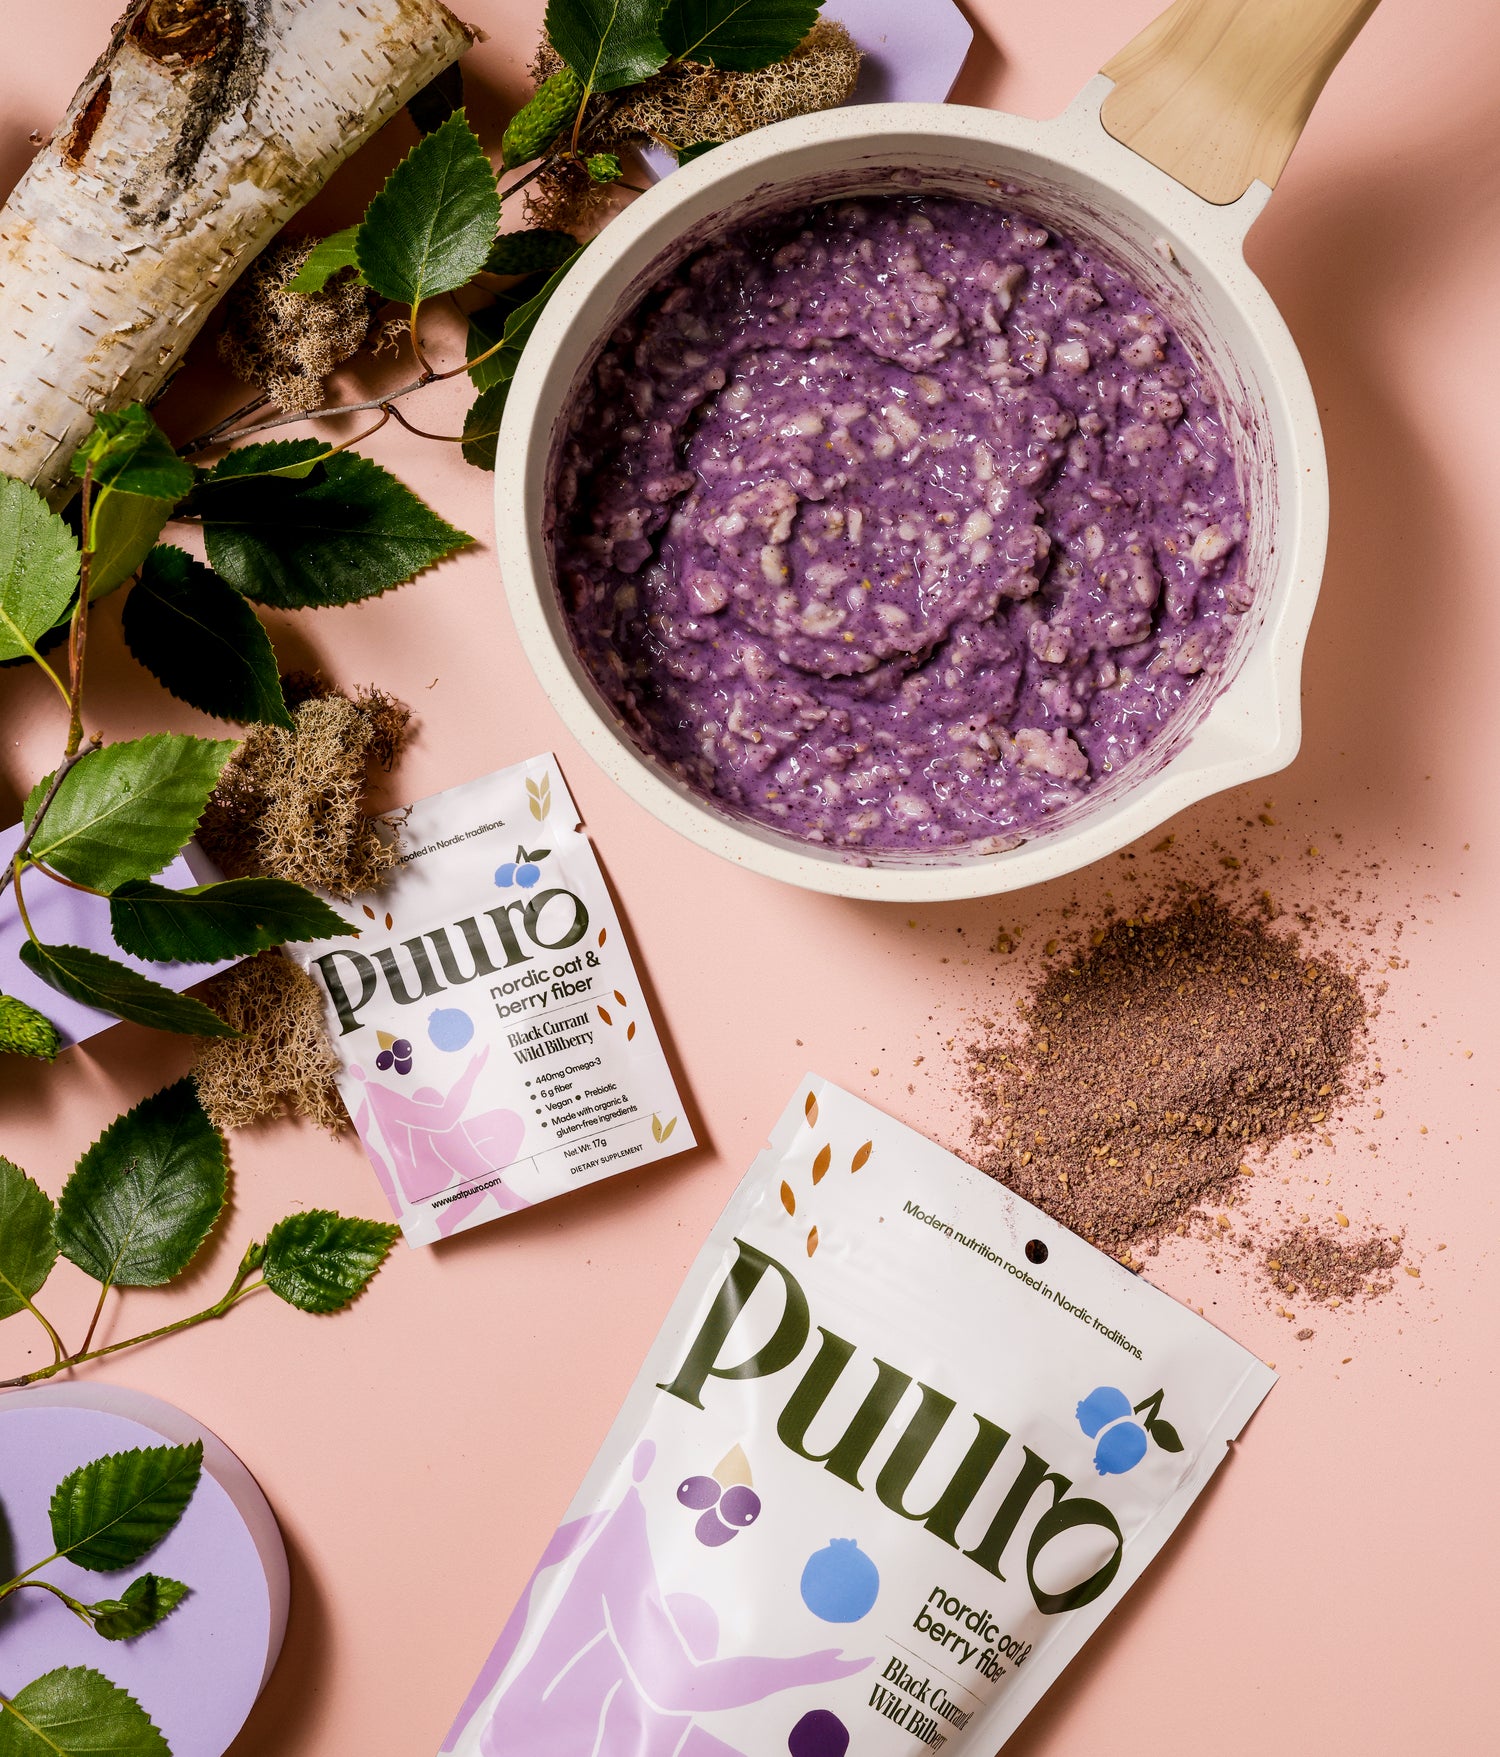 A Puuro fiber pouch opened on a table, with insides scattered, laying beside a pot of cooked purple oatmeal.